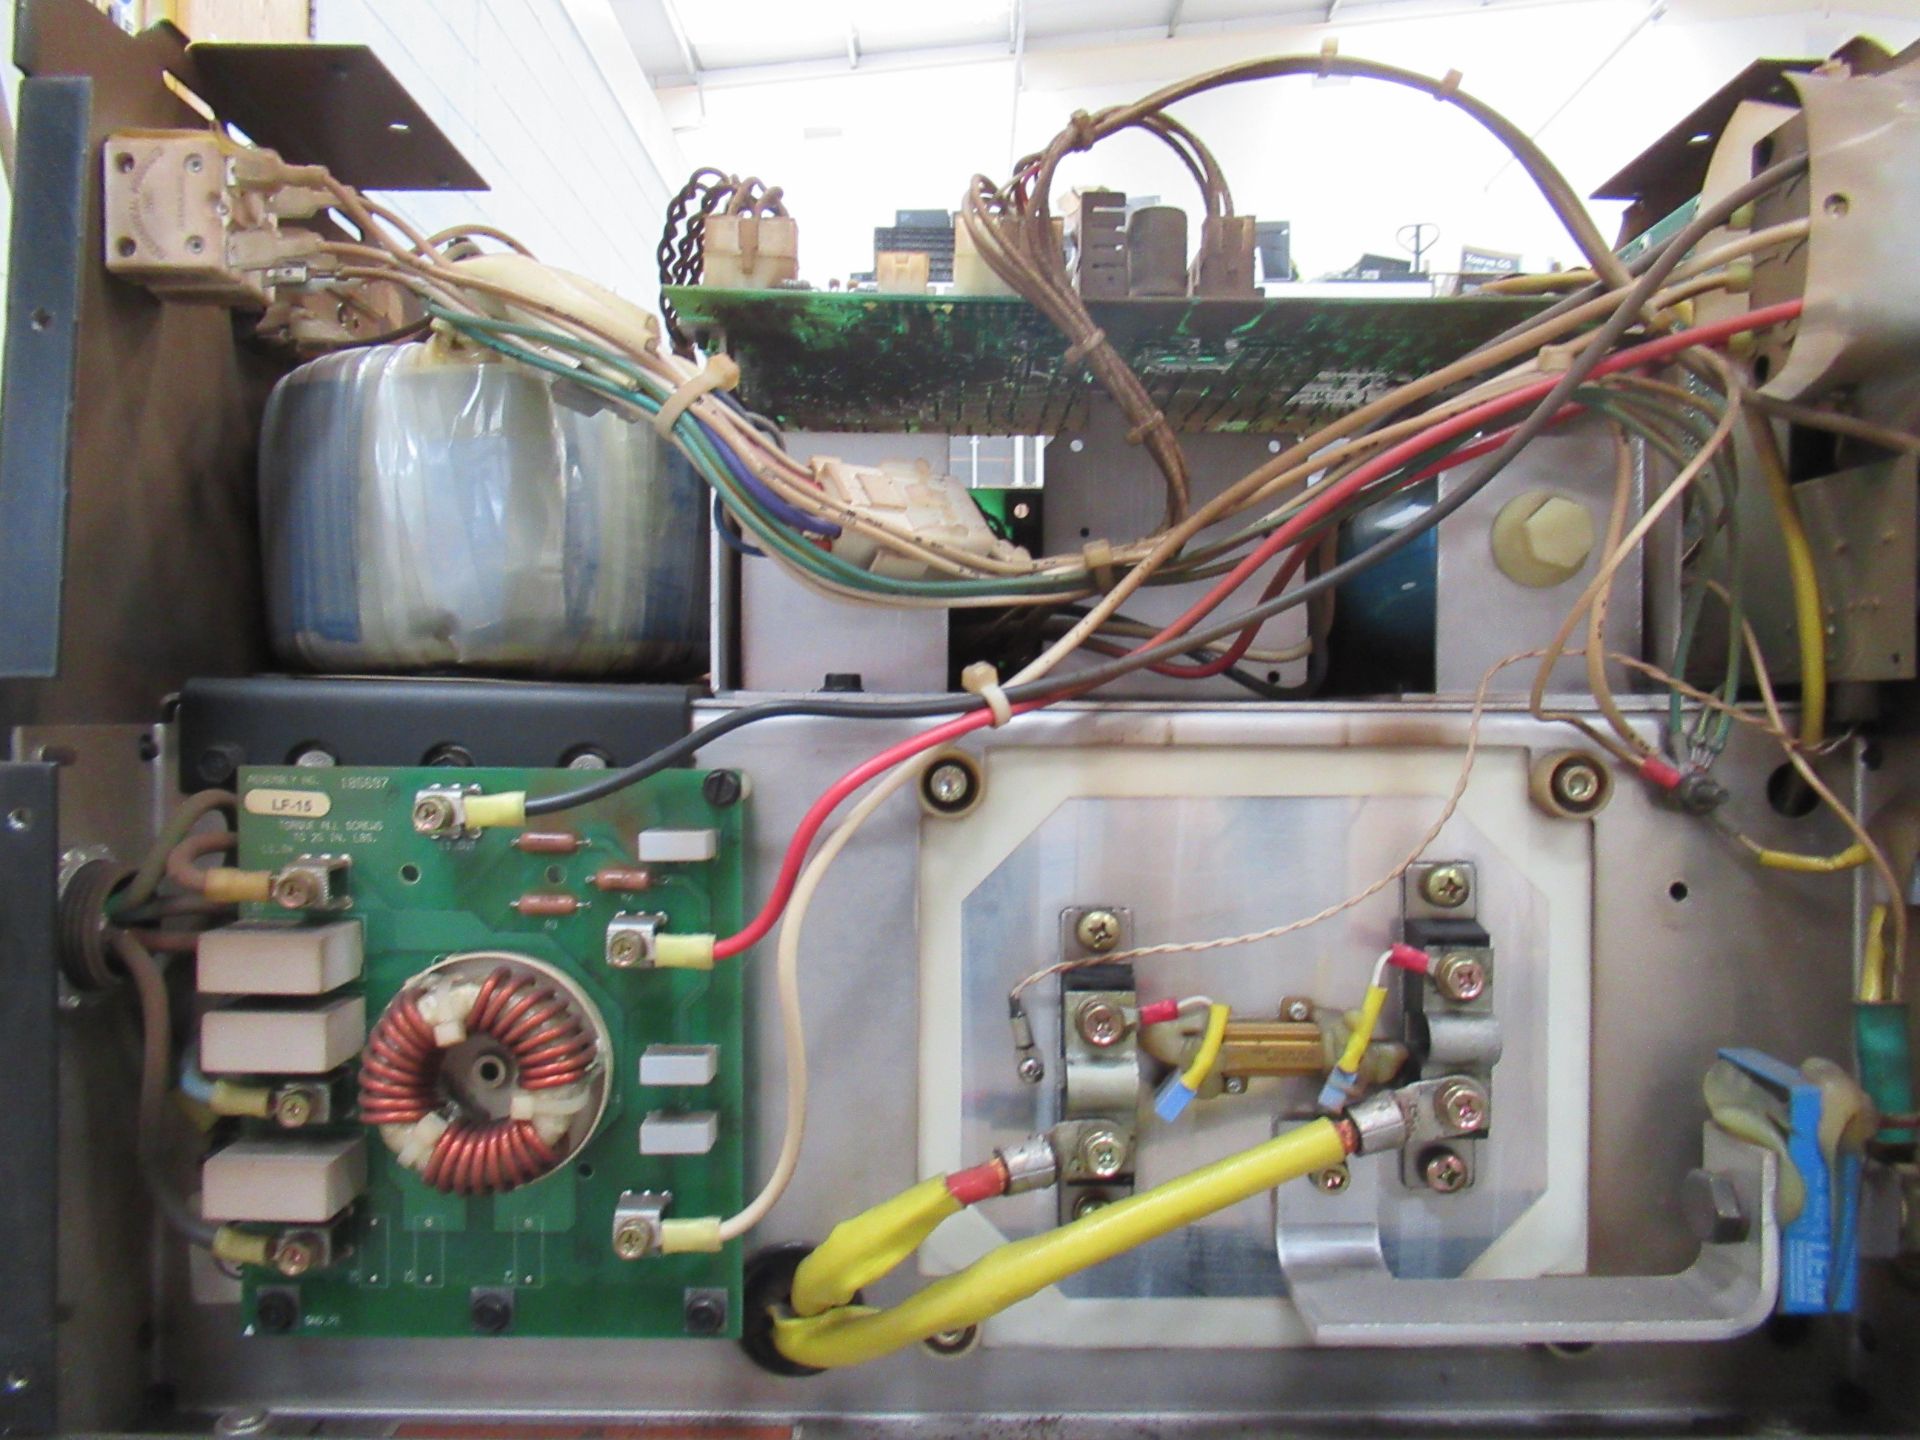 Miller XMT 304 series DC inverter welder with leads etc - Image 7 of 9